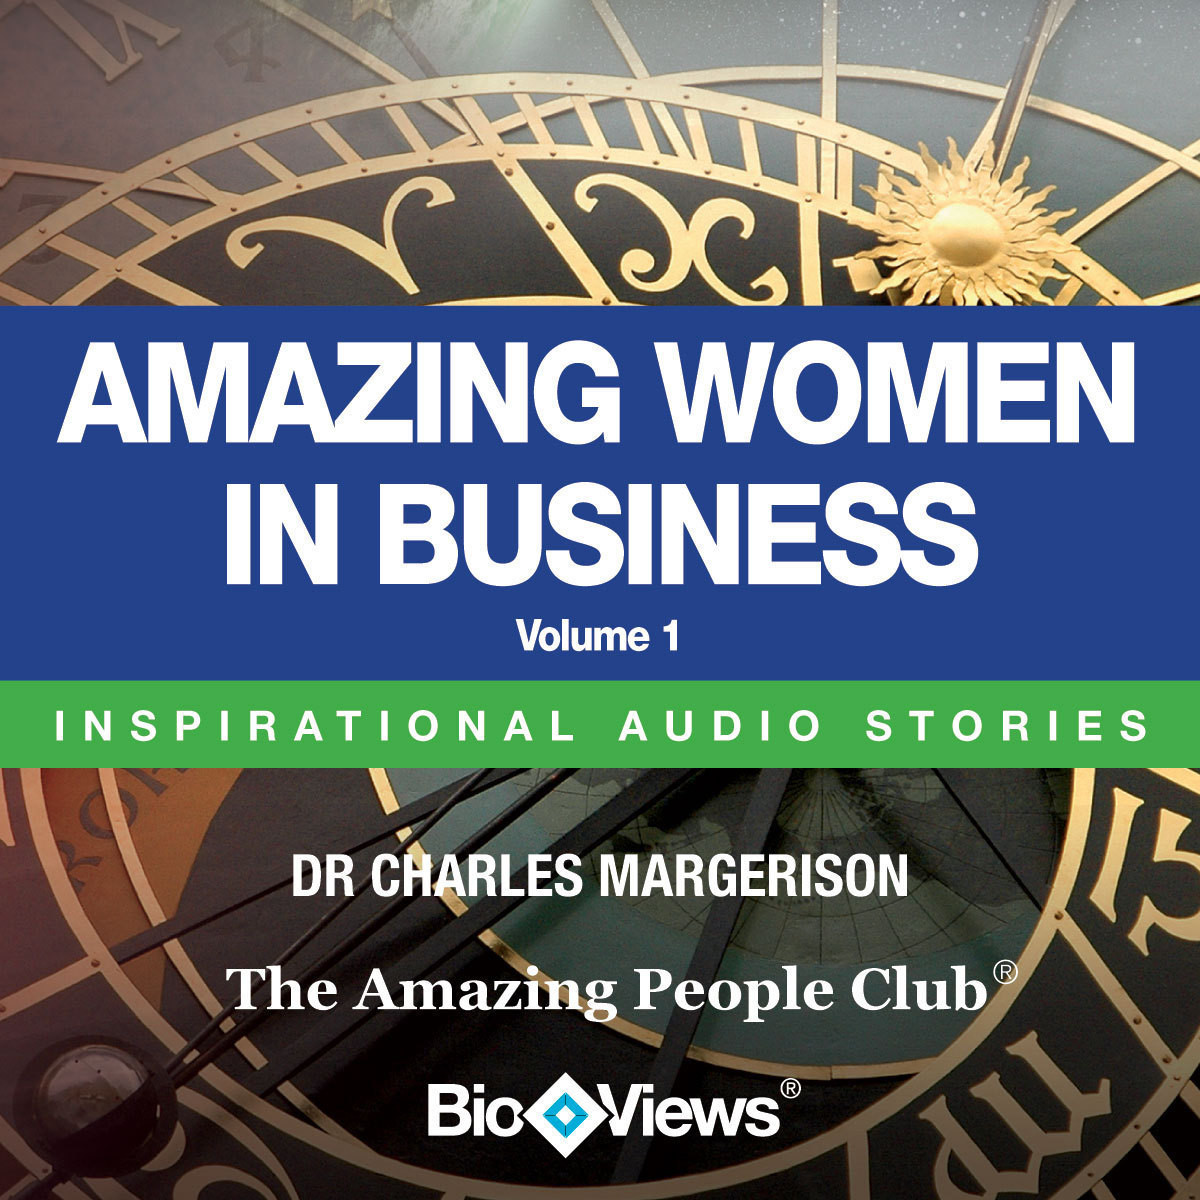 Amazing Women in Business, Vol. 1: Inspirational Stories Audiobook, by Charles Margerison